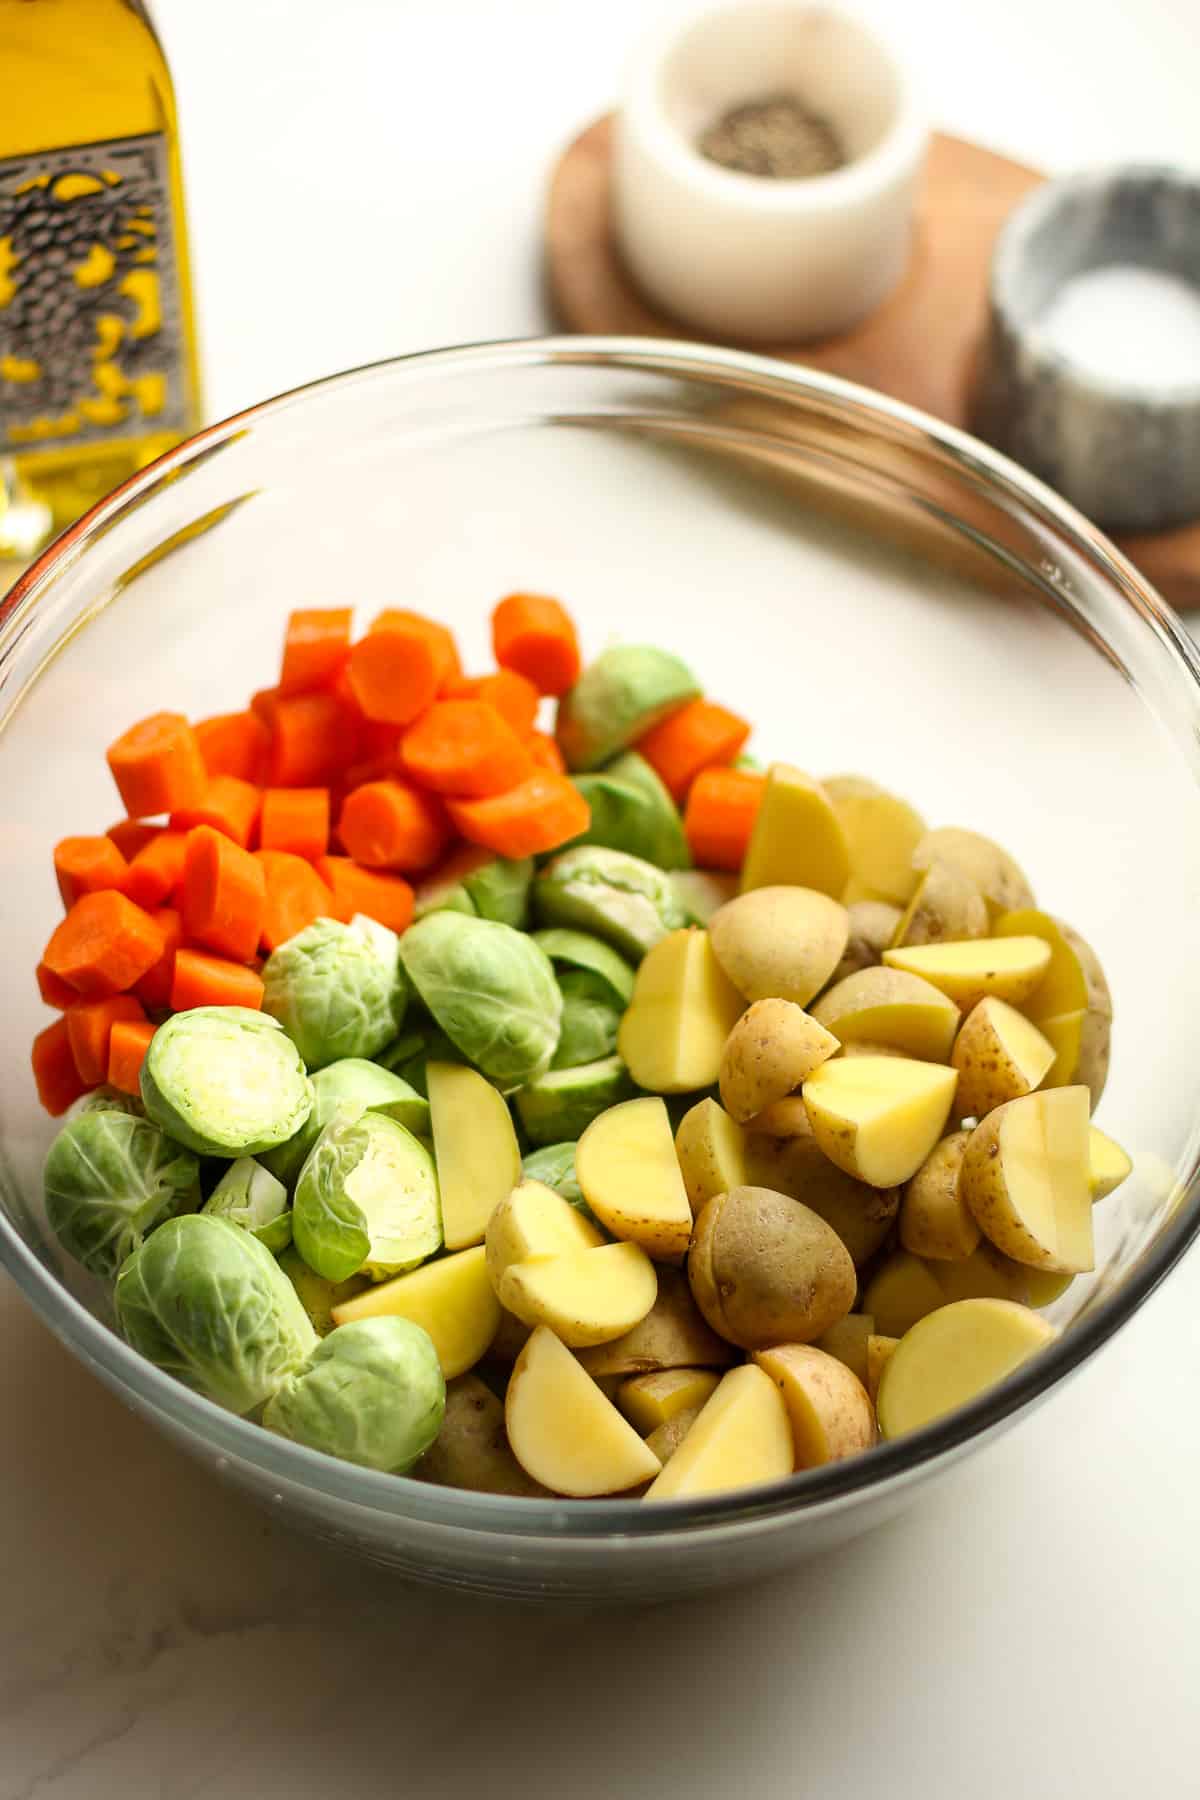 Side view of a bowl of chopped veggies, with a bottle of olive oil in the background.